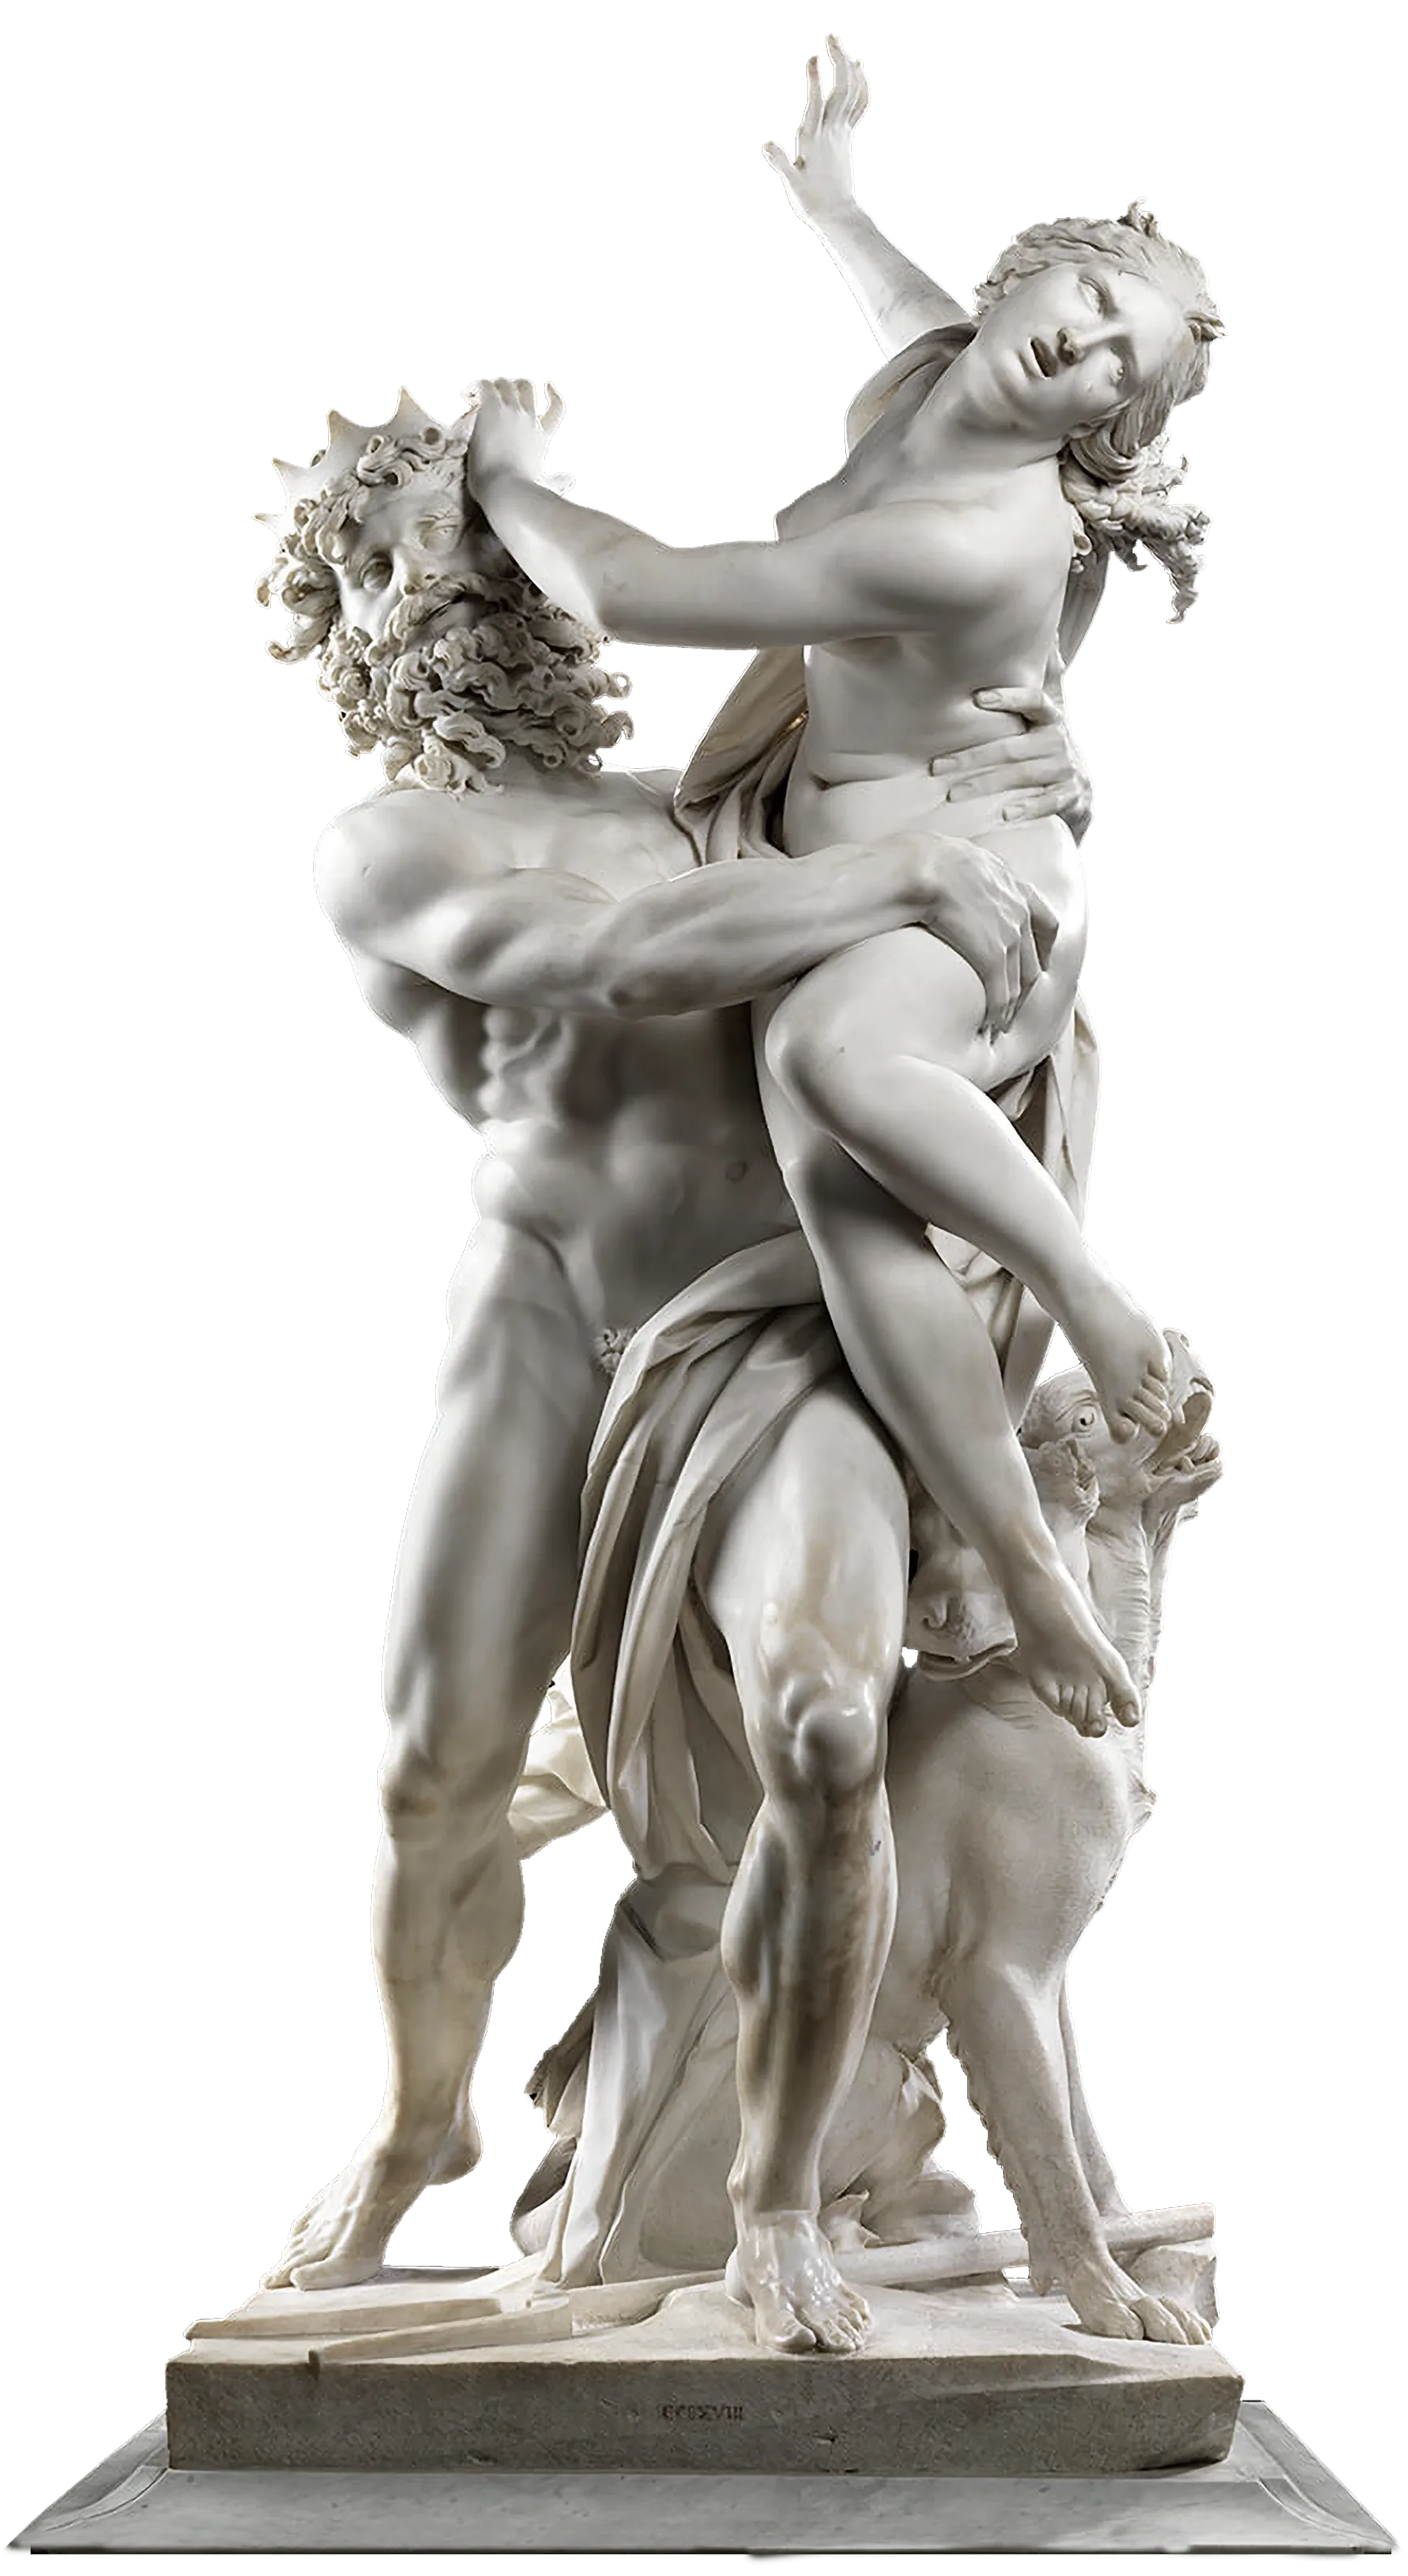 A sculpture depicting the abduction of Proserpina, who is seized and taken to the underworld by the god Pluto. She is held aloft by Pluto and is resisting him by pushing against his face.